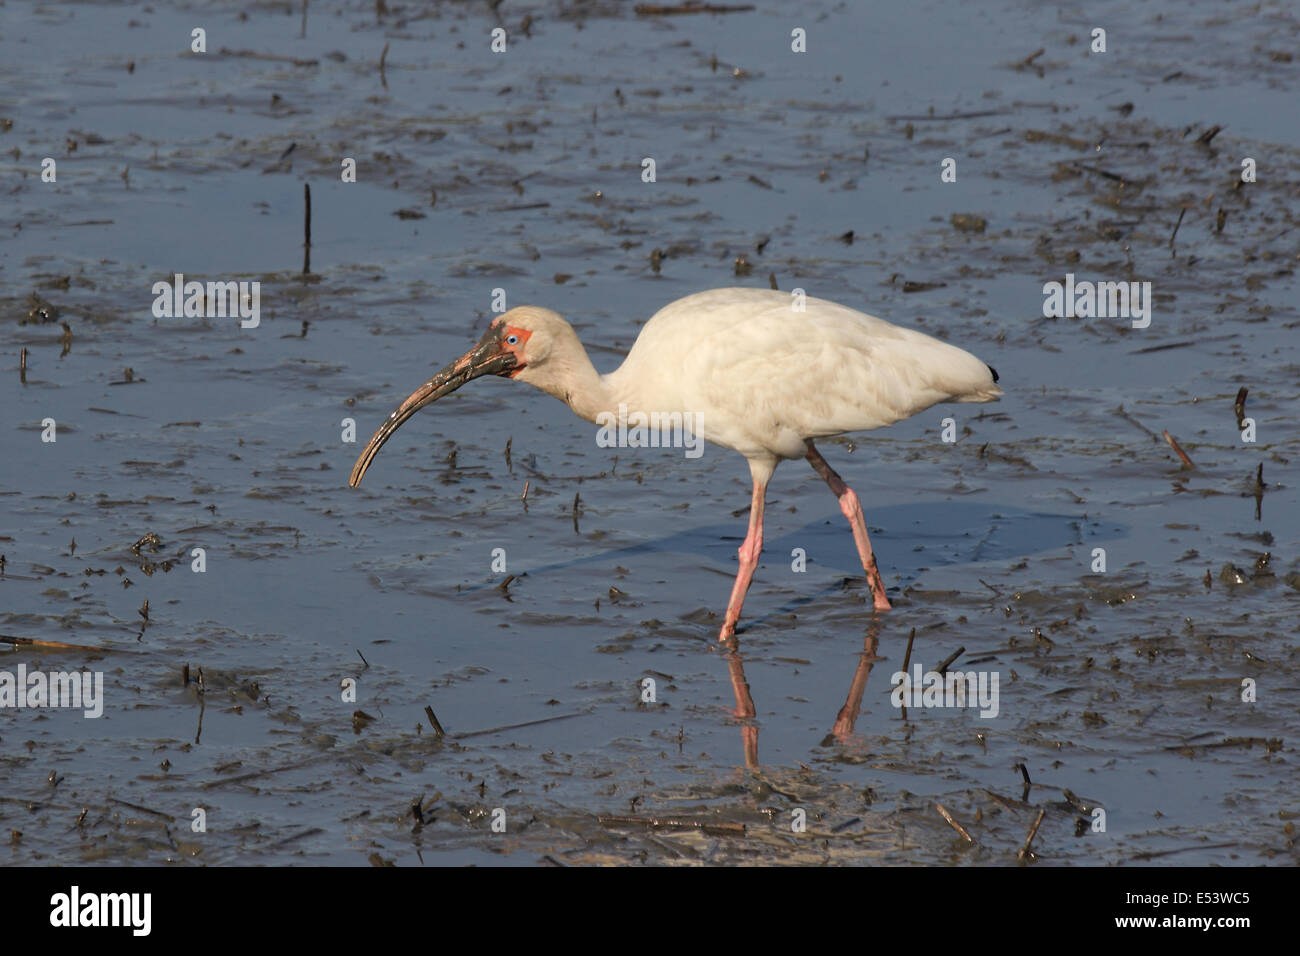 An American White Ibis with a dirty face from feeding in the pluff mud wades in a coastal marsh near sunset. Stock Photo